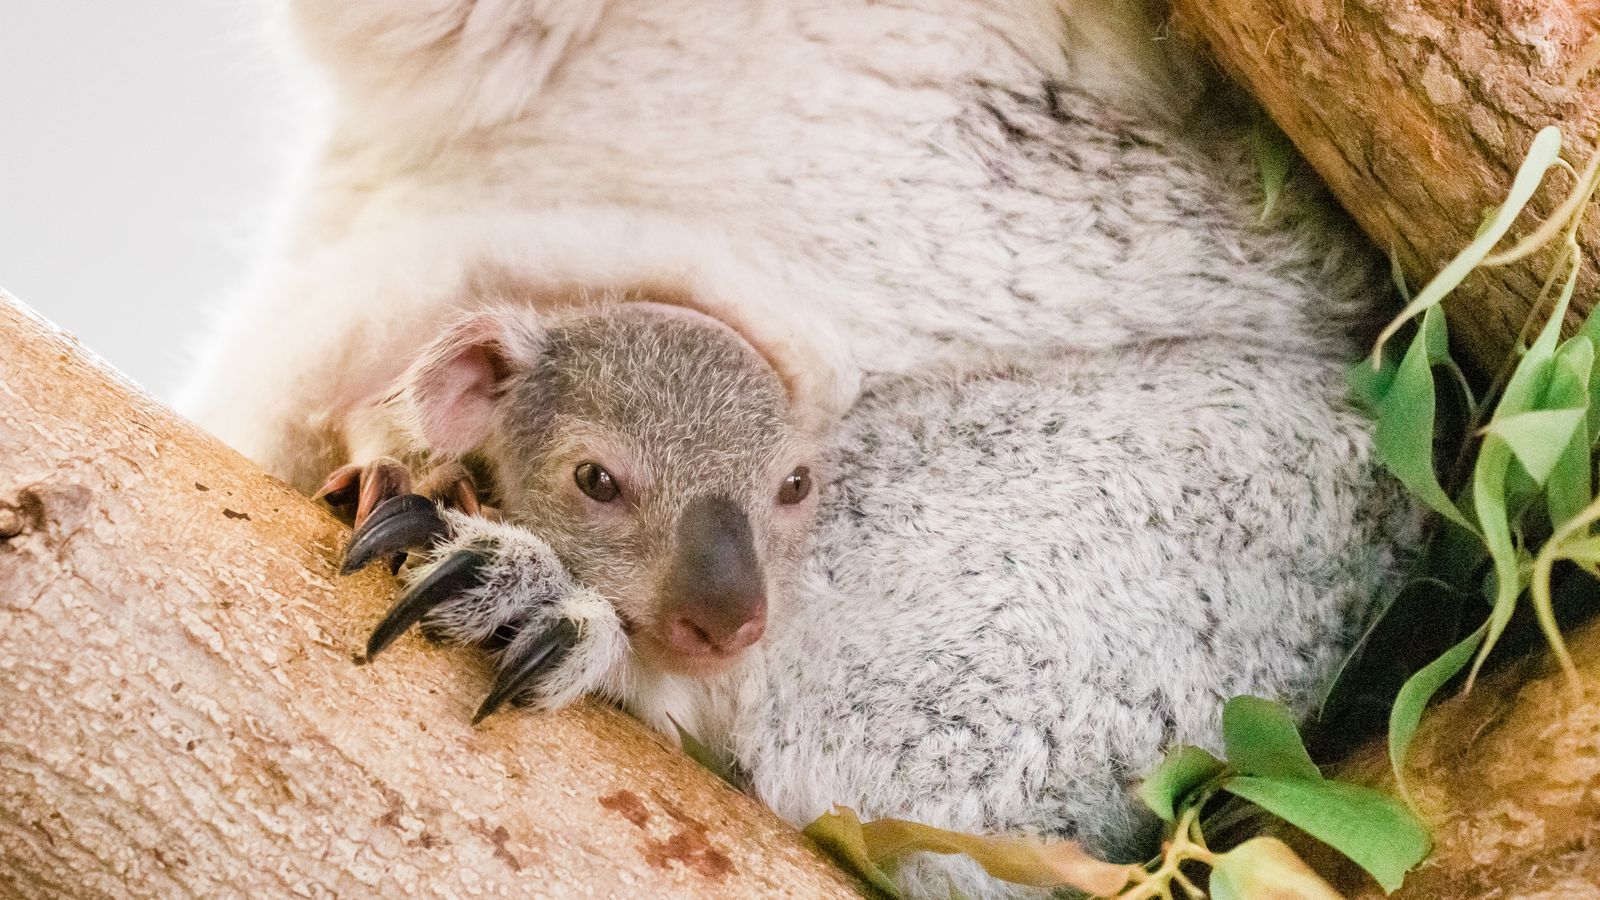 Look at these baby koala photo from ZooTampa